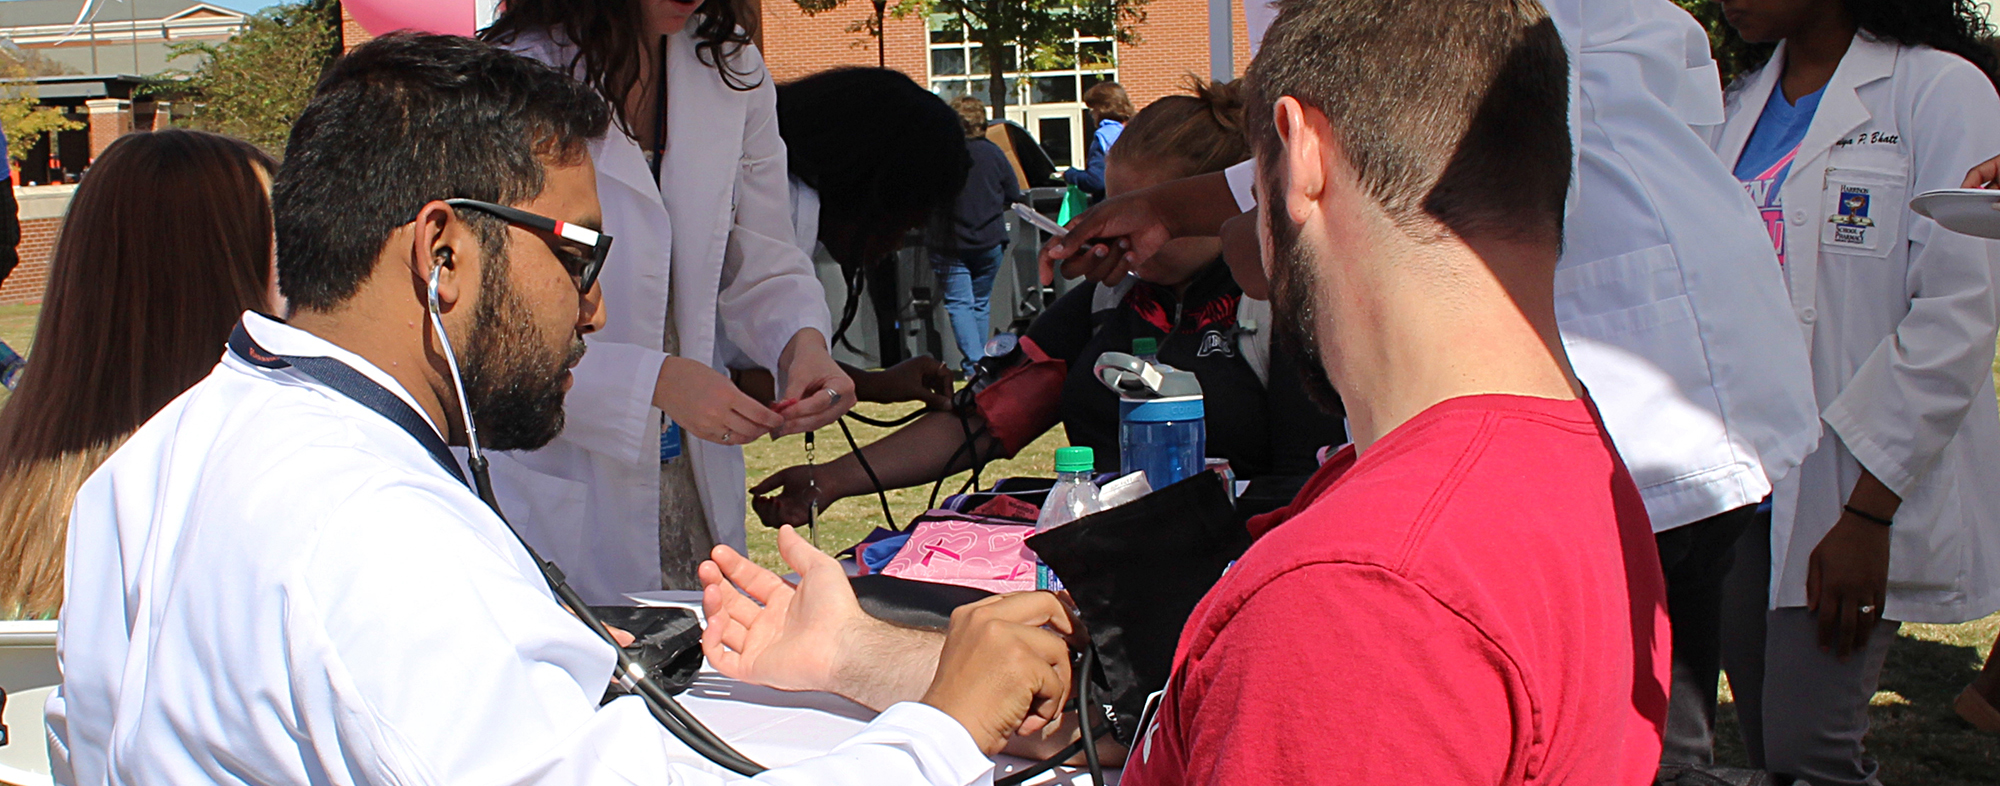 Student administering blood pressure check on patient